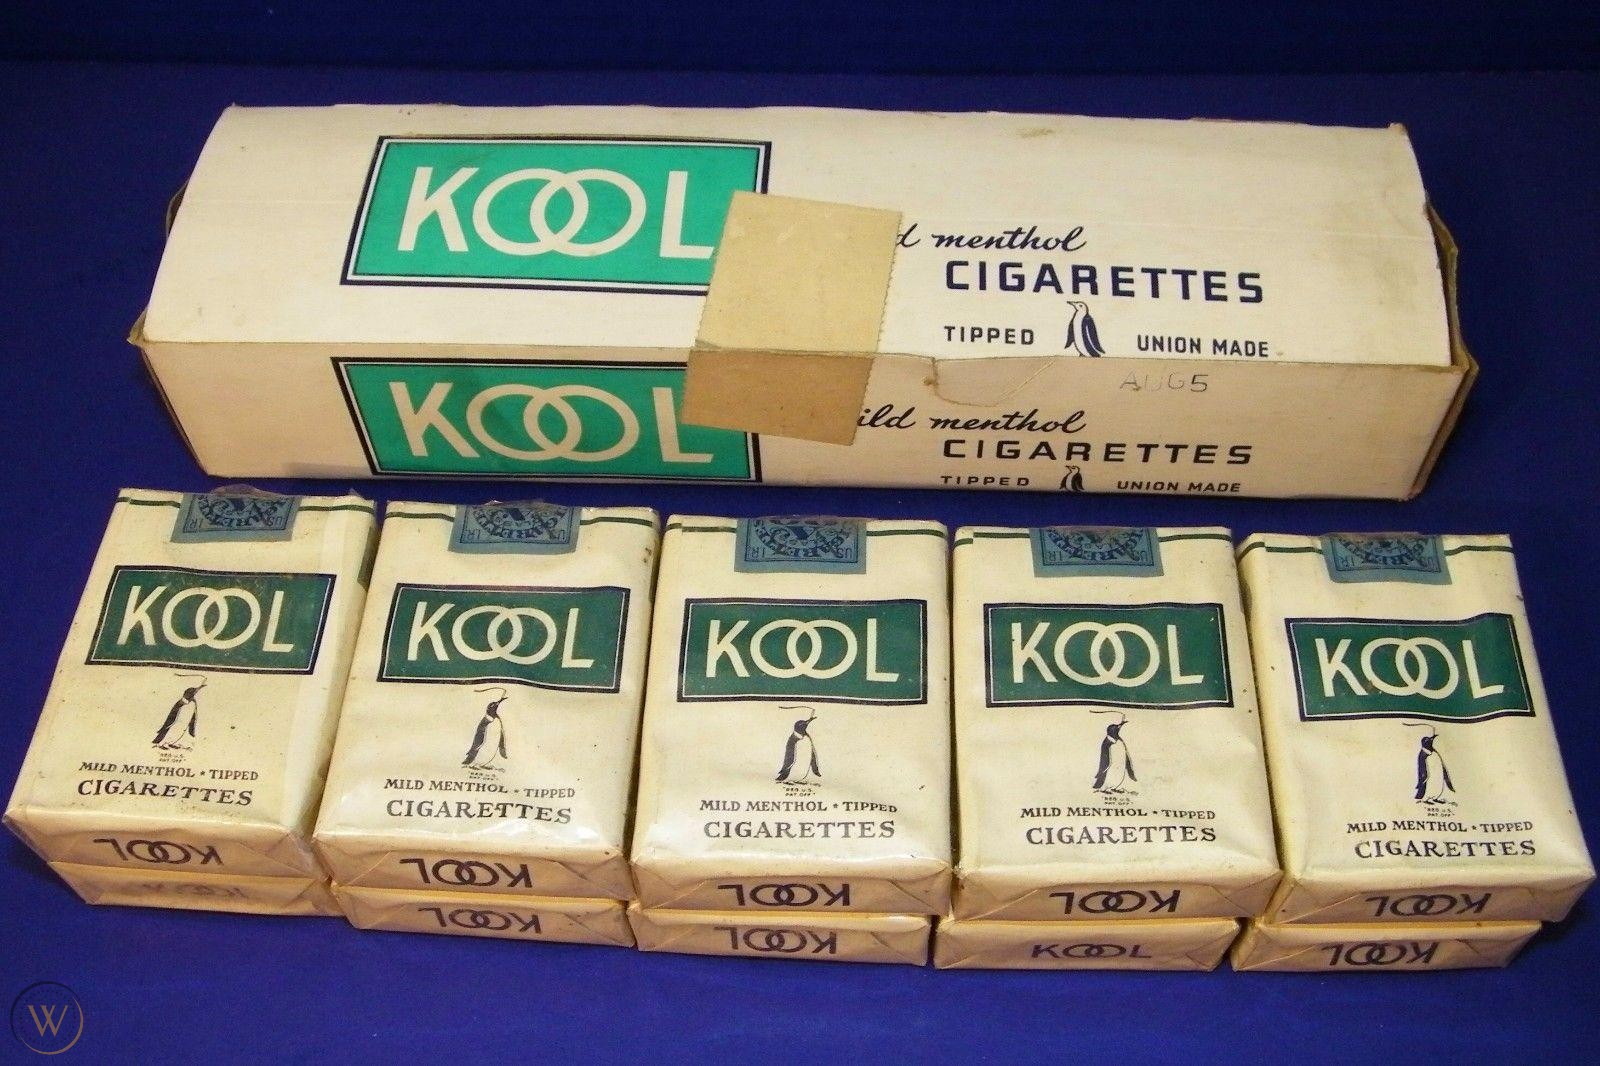 Kool Cigarettes Sues Cannabis Company for Allegedly Copying Their Logo